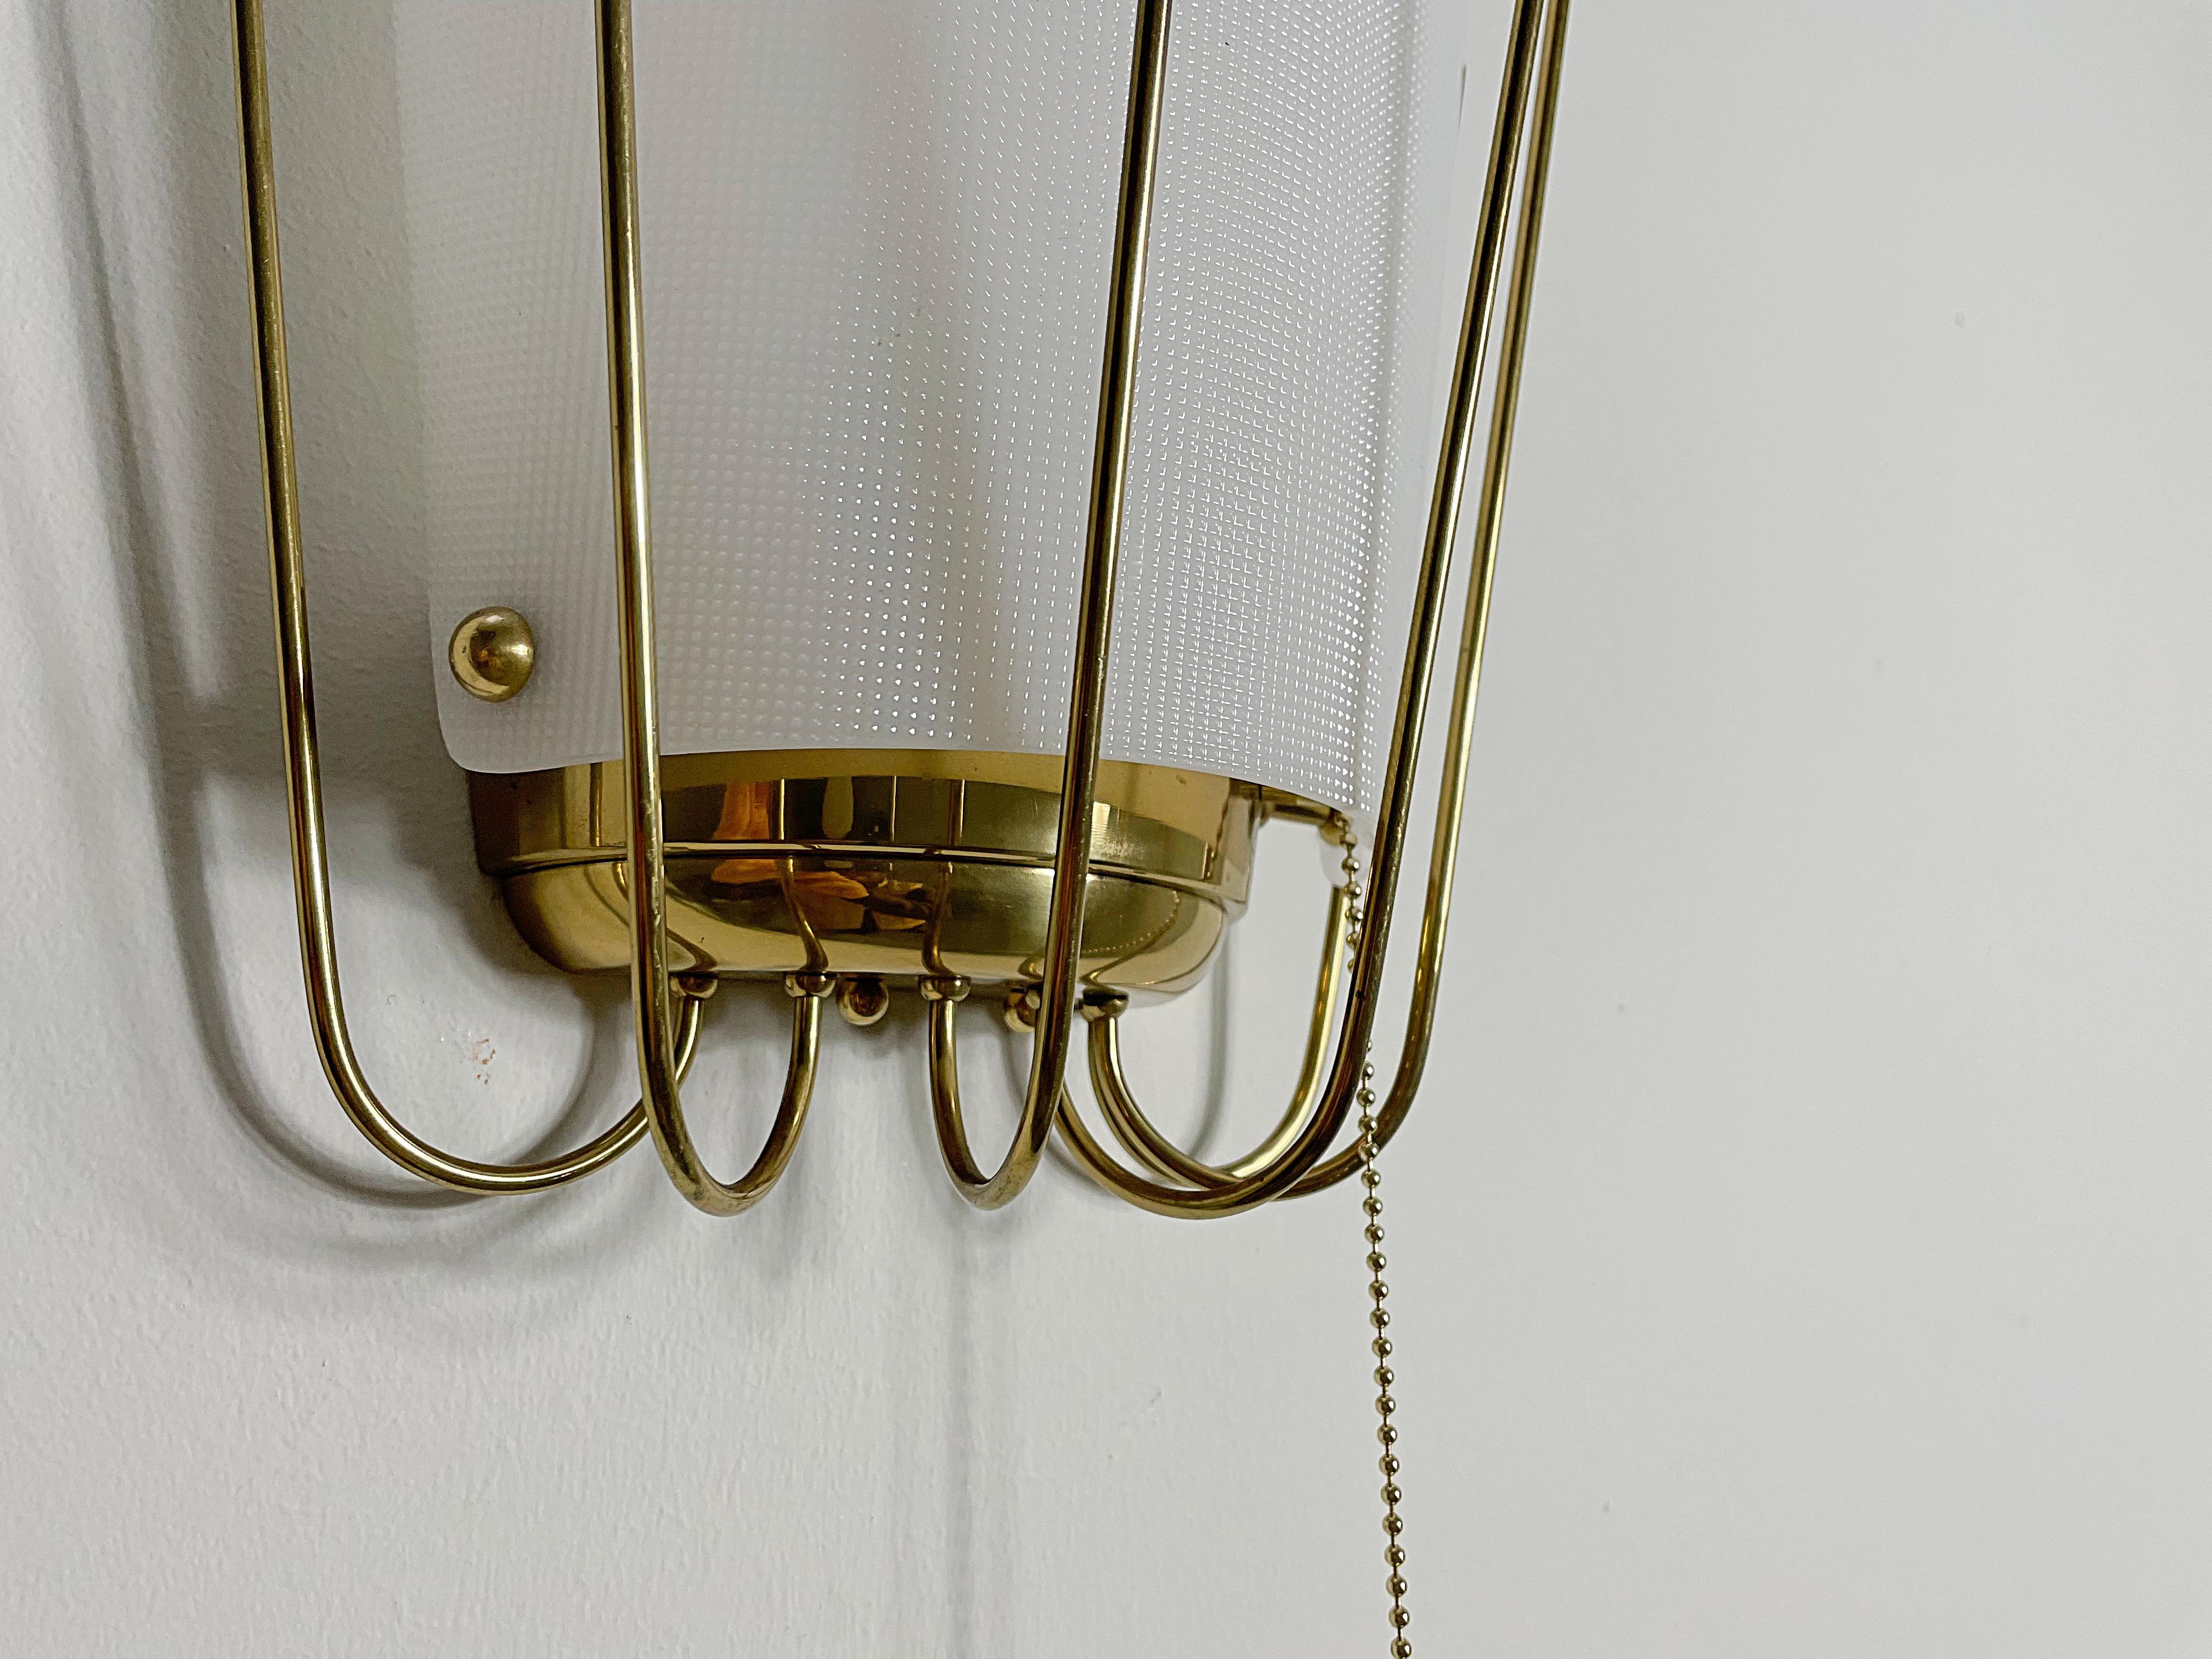 Hand-Crafted J.T. Kalmar Midcentury Brass Wall Light, Sconce, Brass Pins, 1950s, Austria For Sale